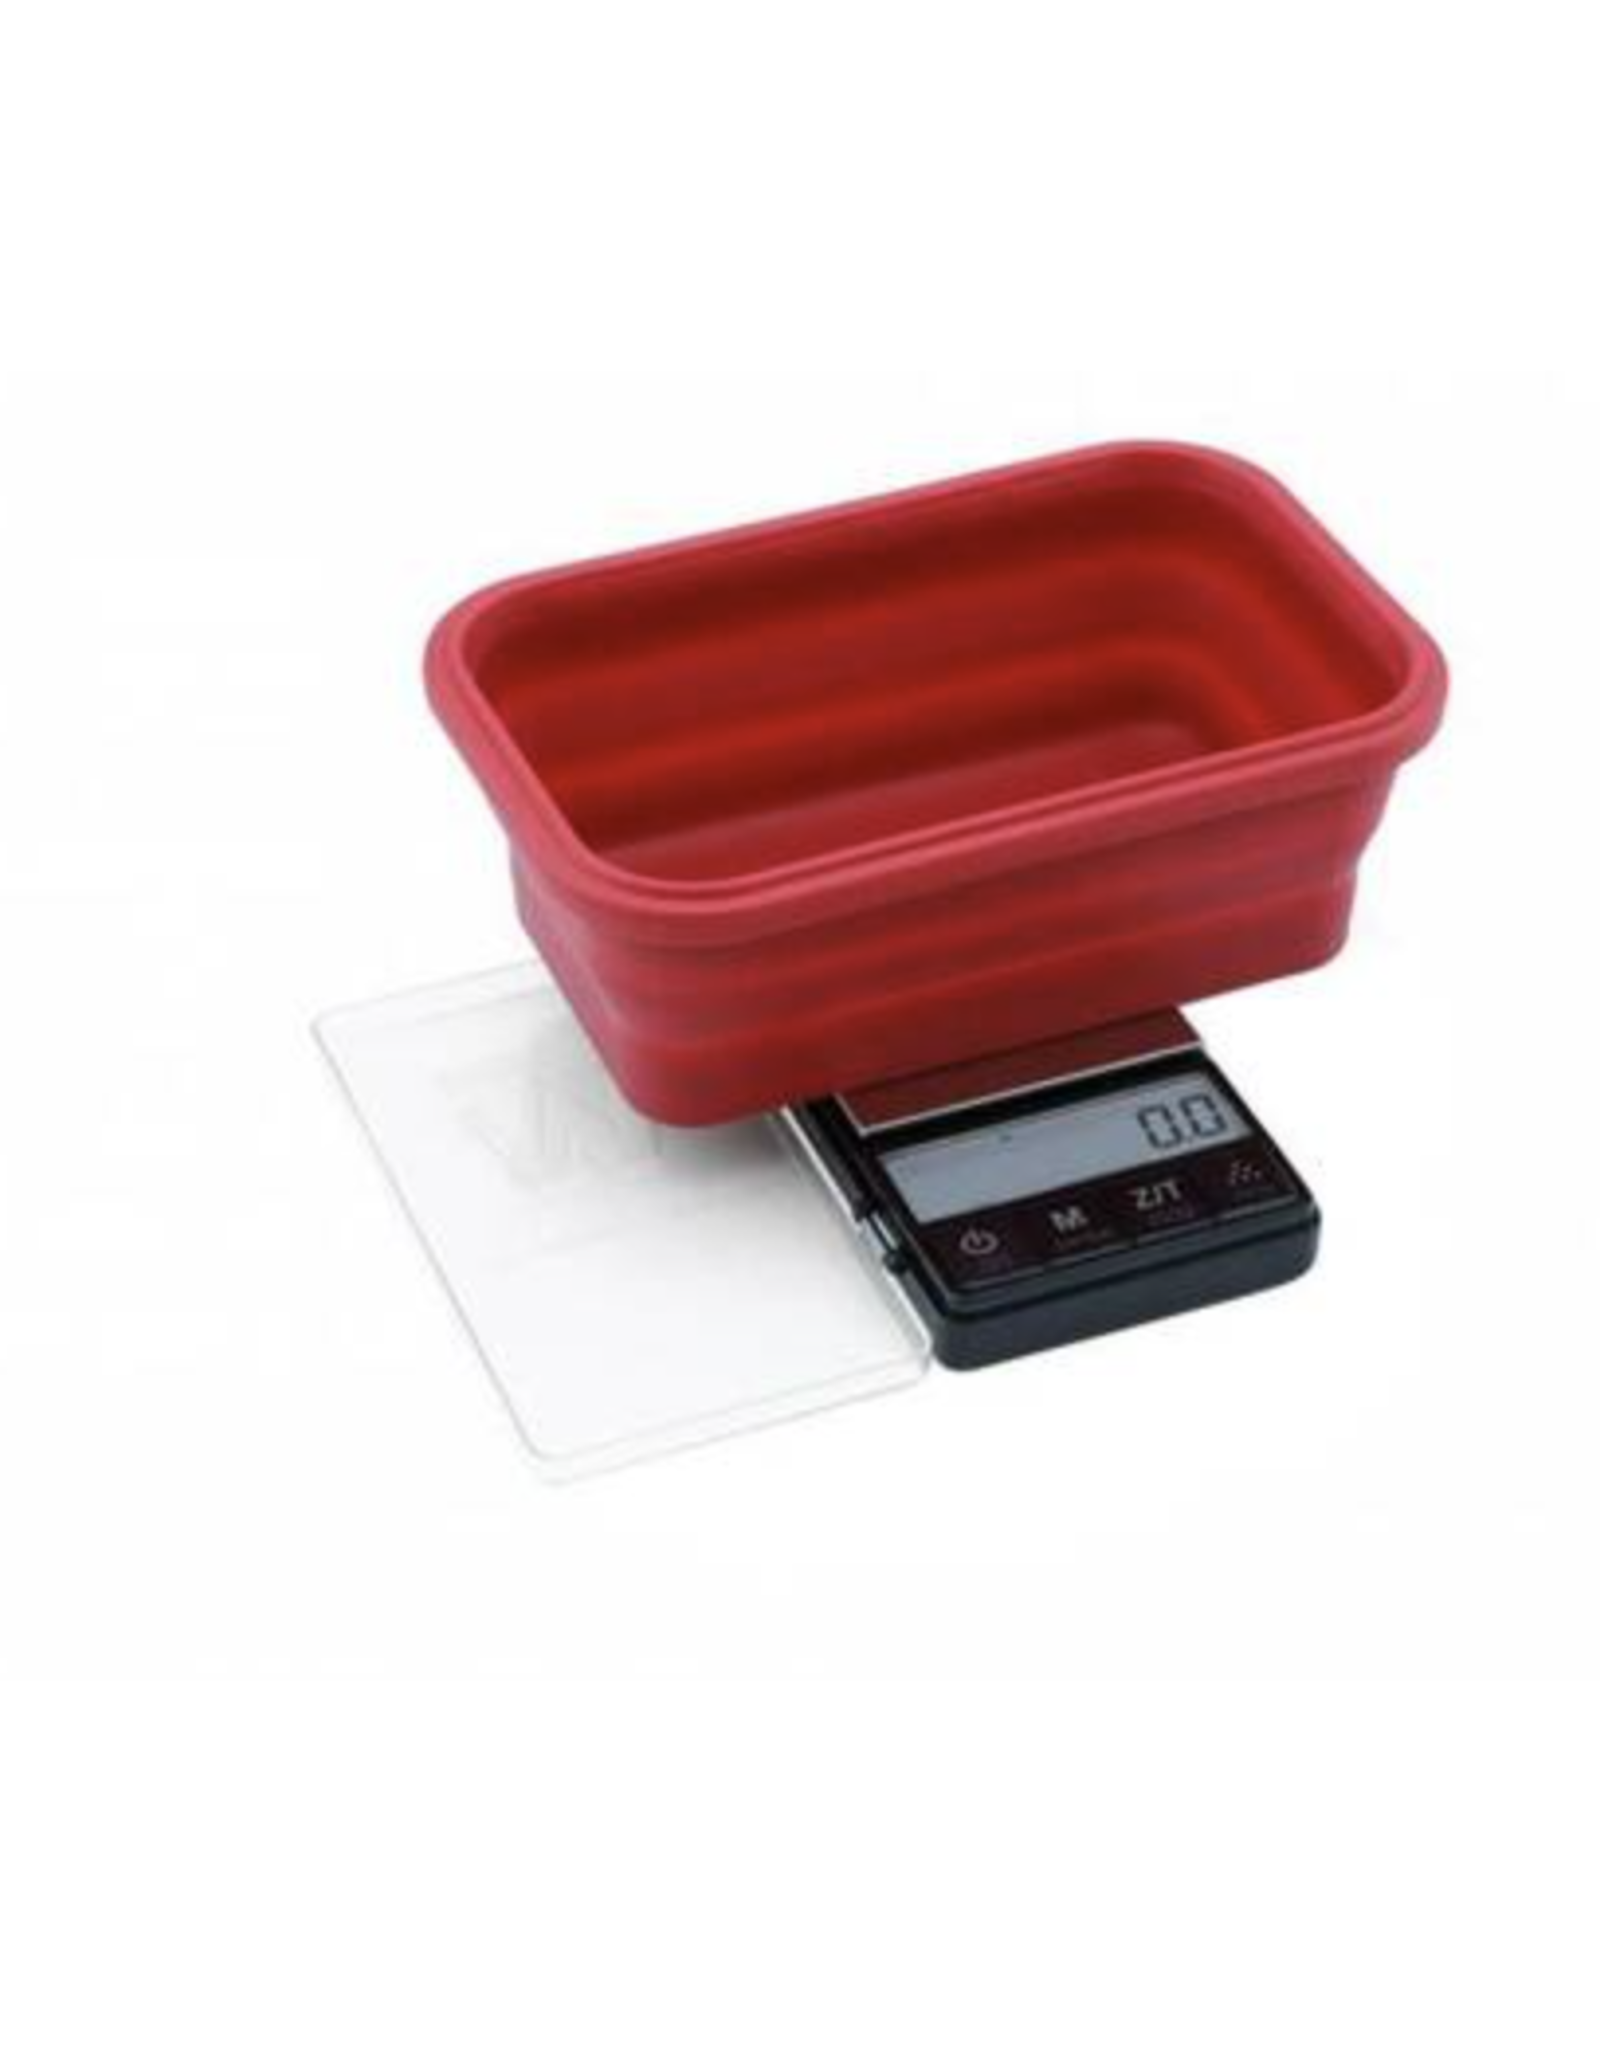 Truweigh - Crimson - Collapsible Bowl Scale 1000g x 0.1g